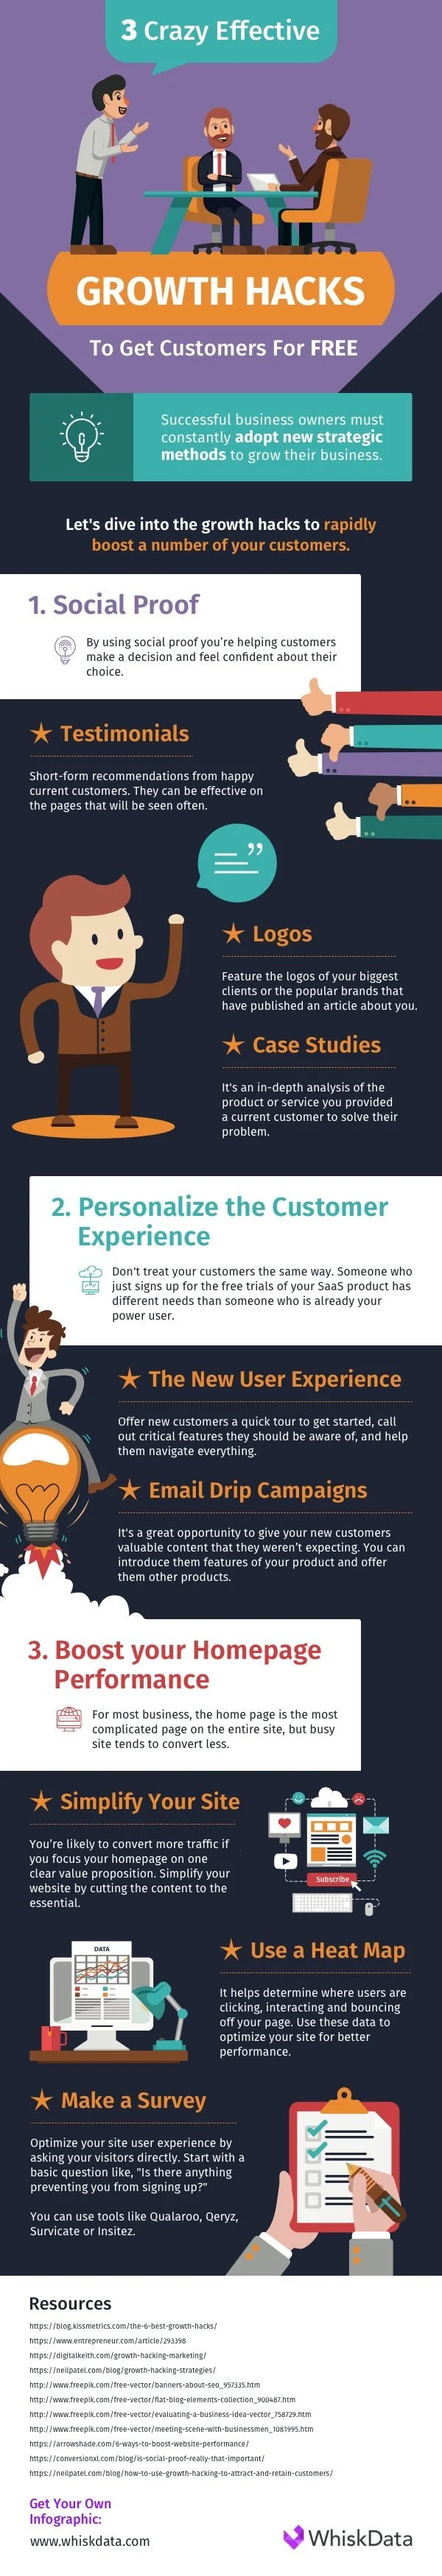 3 Crazy & Effective Growth Hacks to Get More Customers for Free - #Infographic